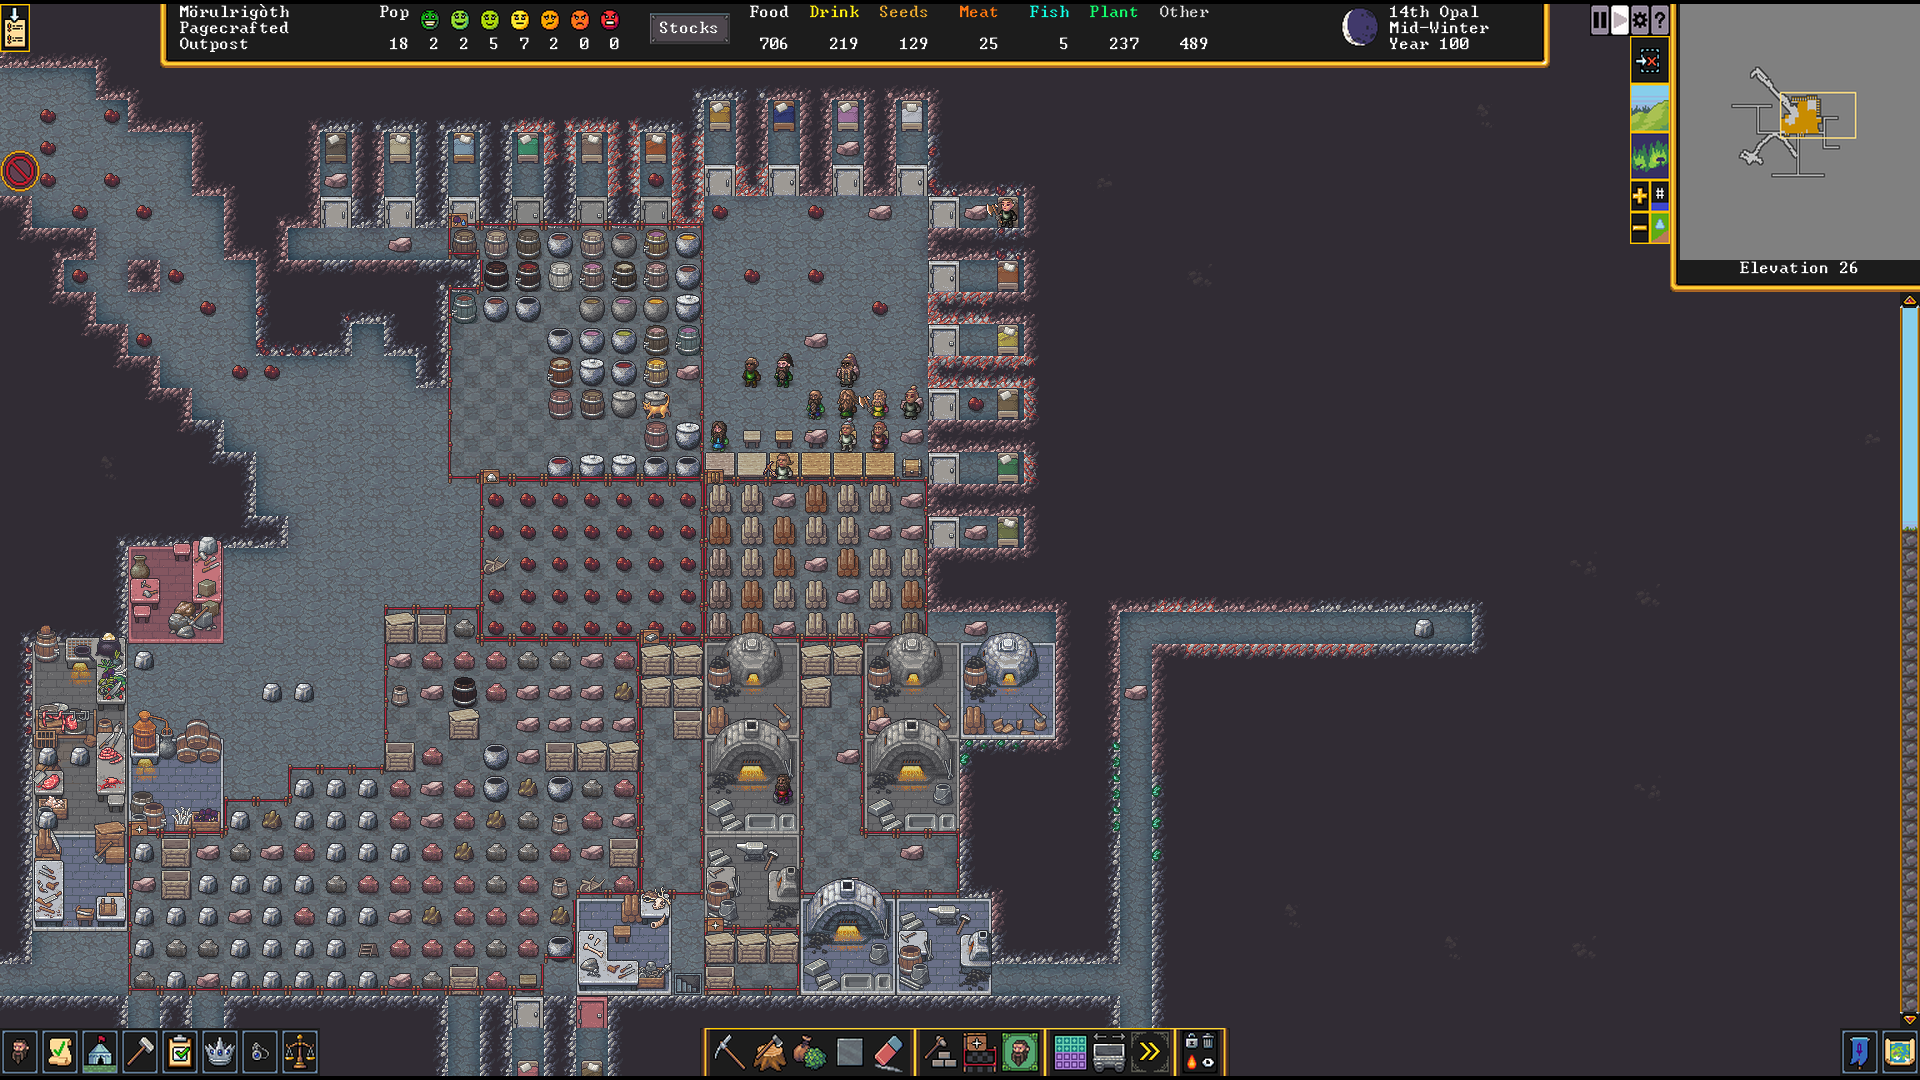 A screenshot of Dwarf Fortress, showing a tiny fort on one level. On the left, some food production workshops. Along the top, tiny bedrooms, a meeting area, and food stockpiles. The center of the room is the metal industry. 3 Wood Burners, 3 Smelters, and 2 Metalsmith's Forges, all surrounded by stockpiles of ore, fuel, bars, and armor.  The population of 18 Dwarves has only 2 less happy than neutral. Stocks include 706 food and 219 drink.